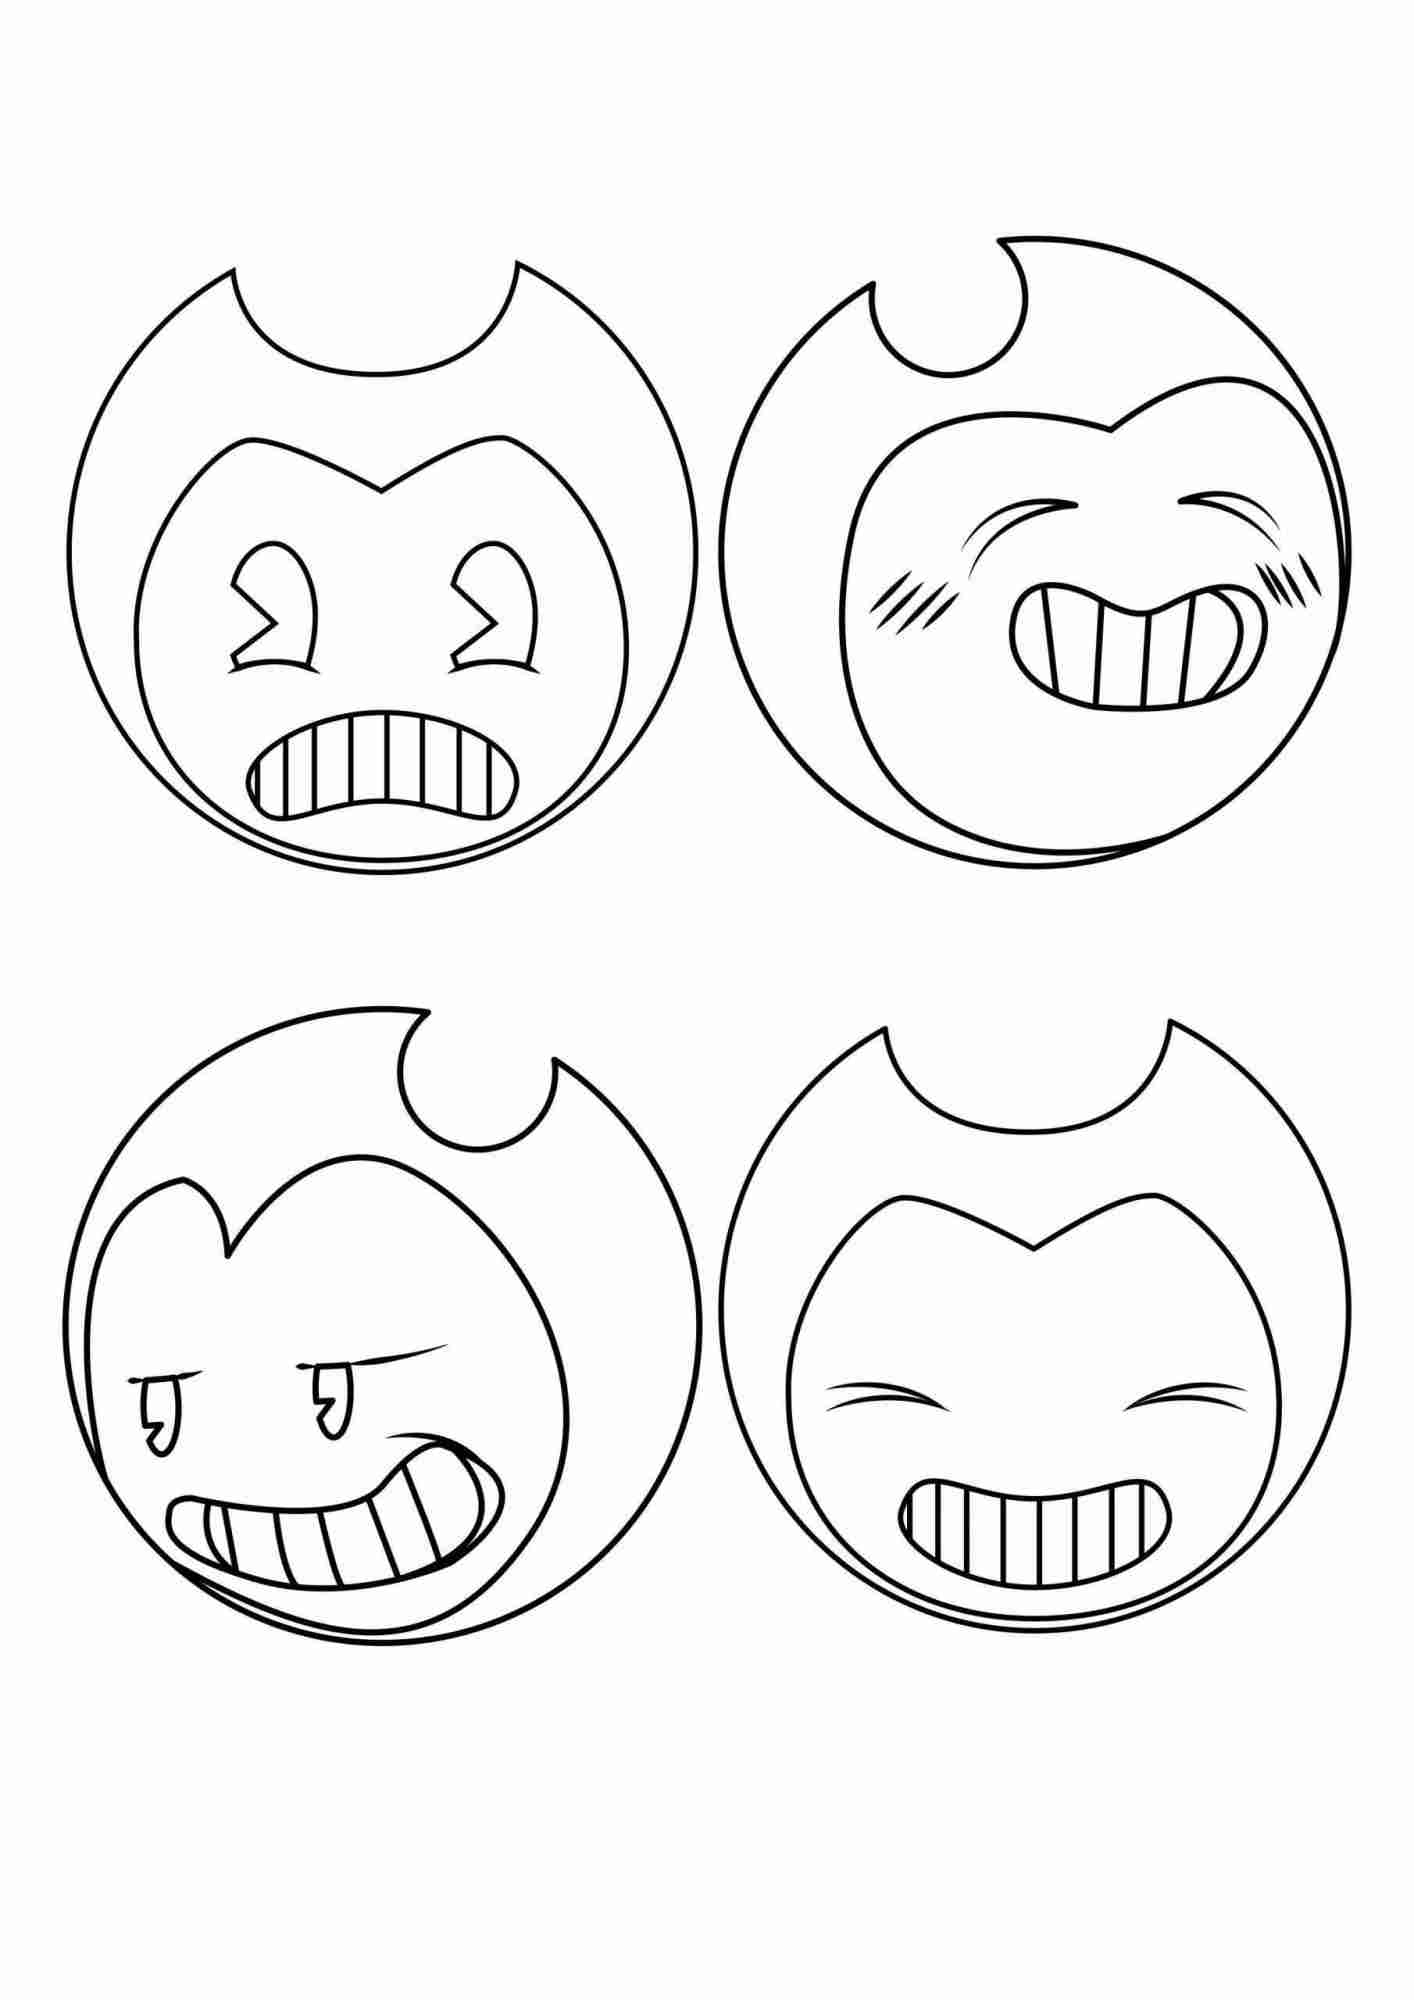 Fifty-shaded of Bendy from Bendy and the Ink Machine Coloring Page